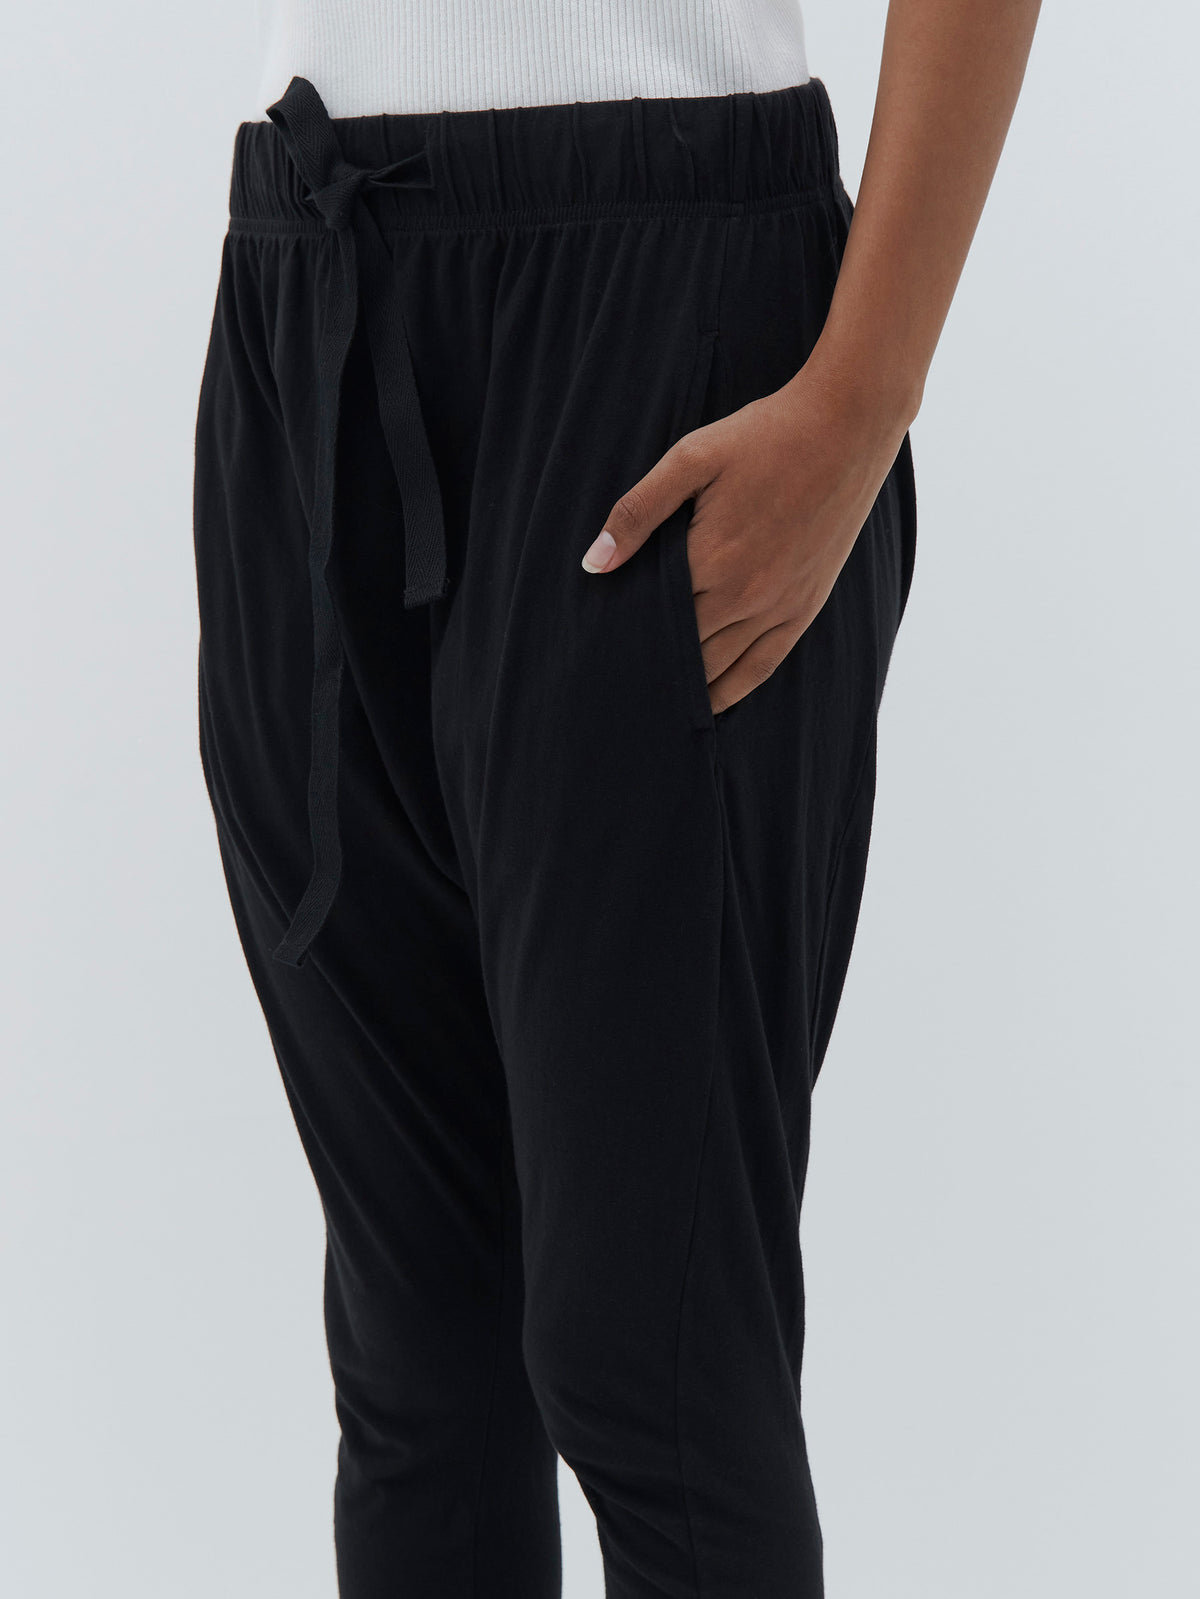 slouch jersey pant lll in black